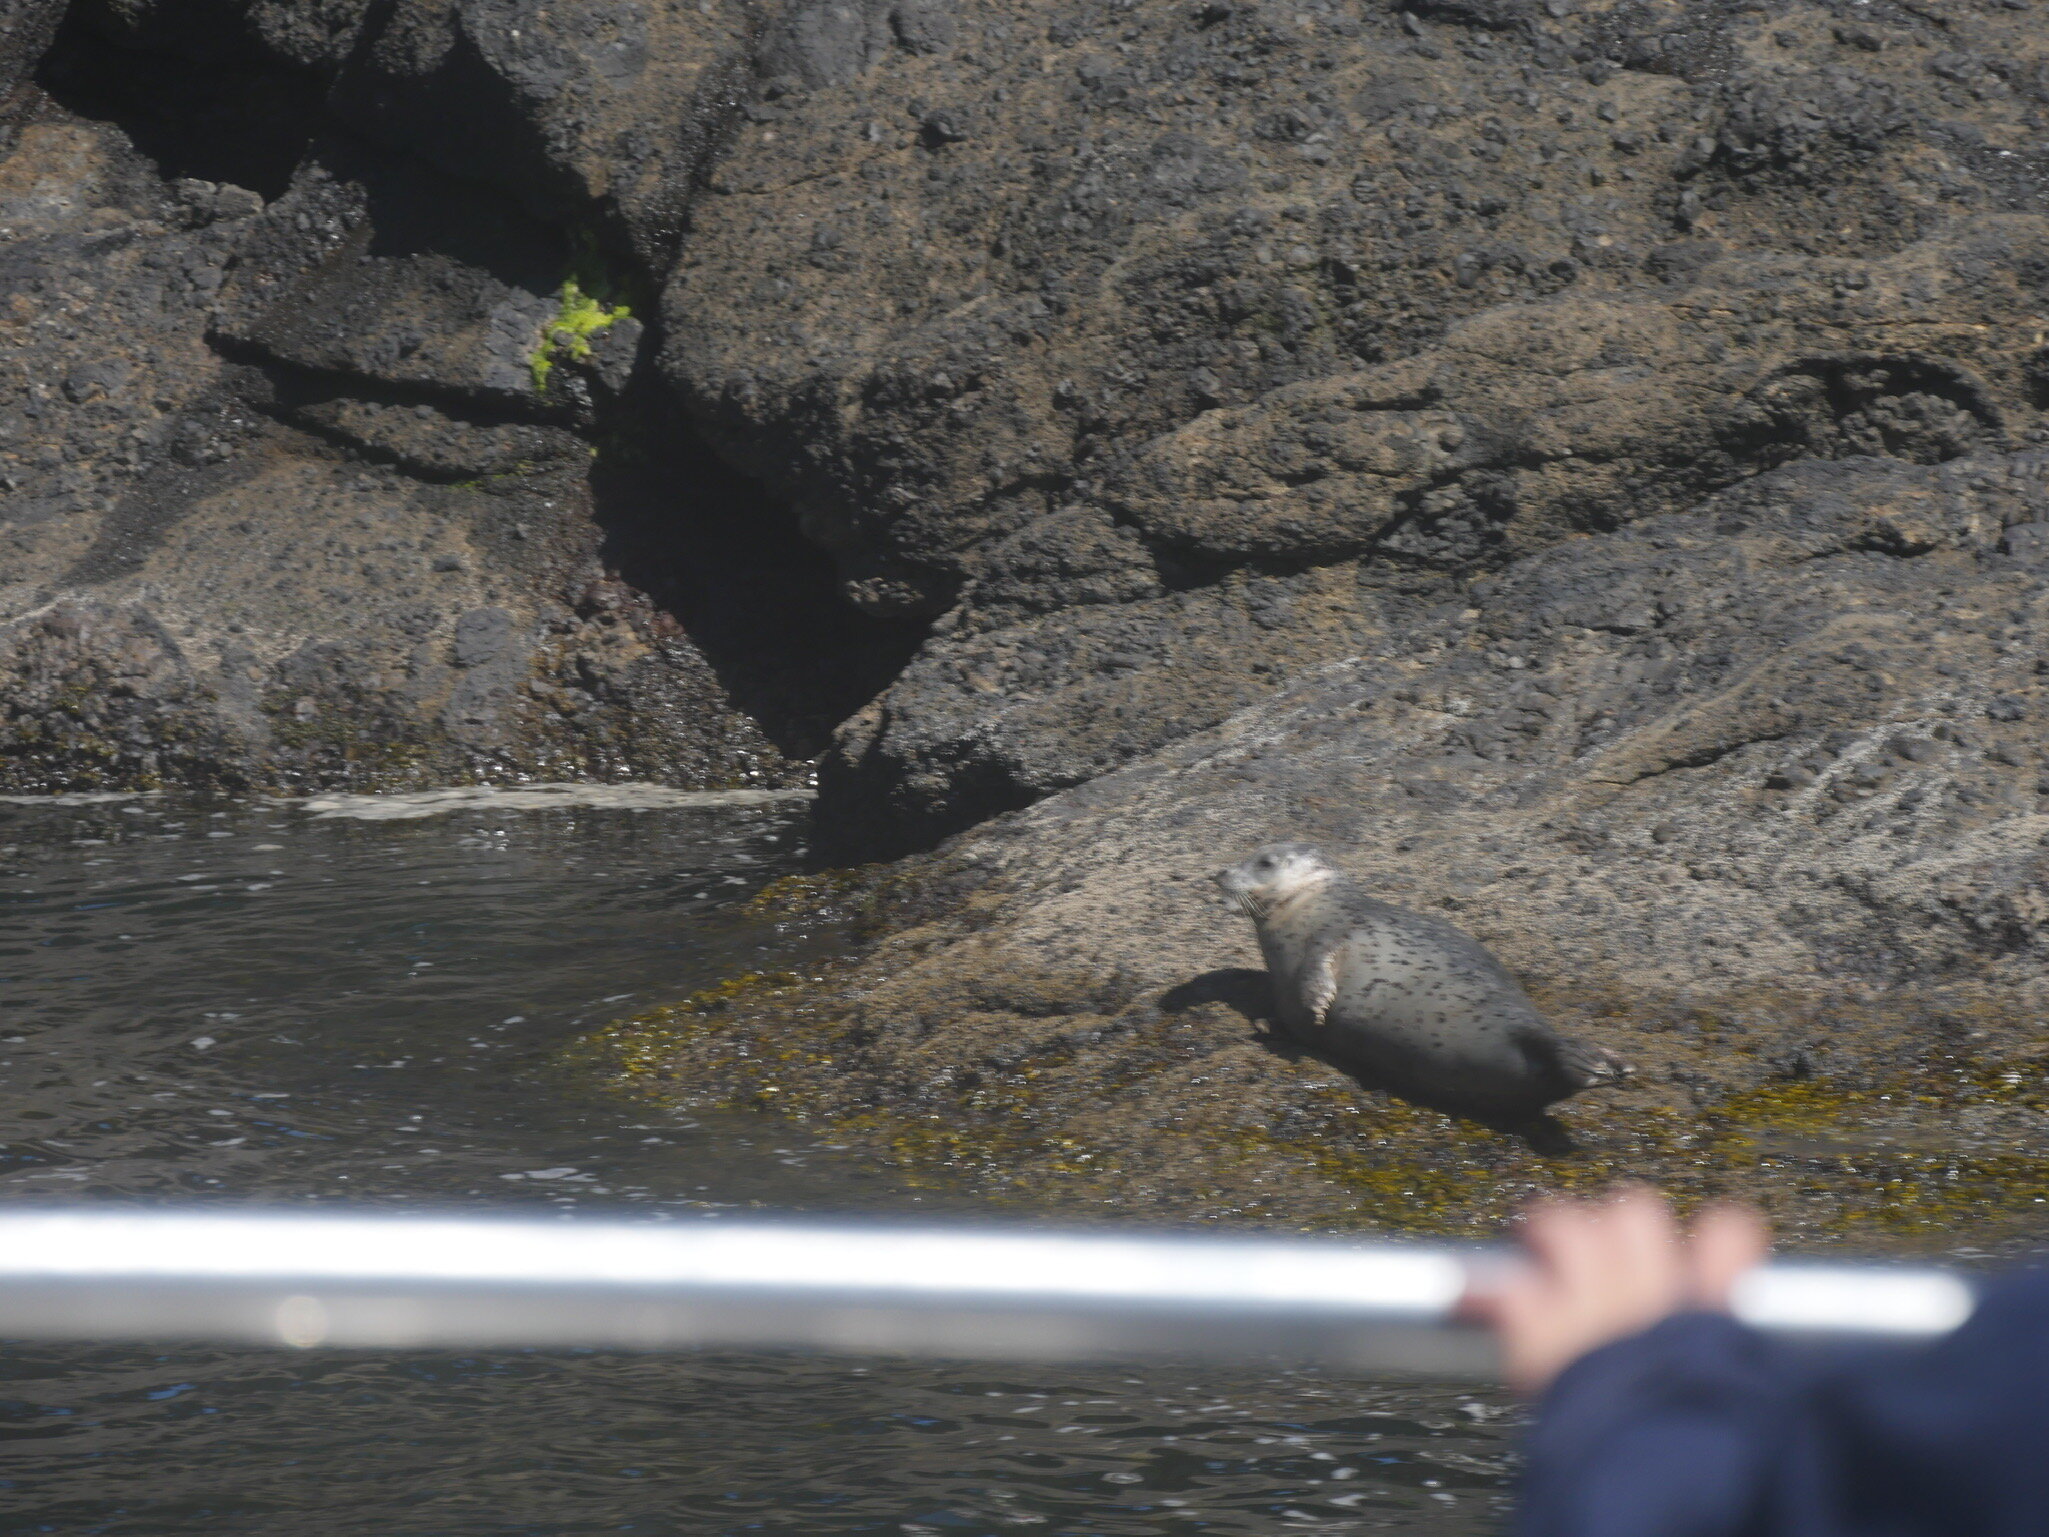 A seal relaxes as we return to the harbor at Depoe Bay.  Photo by Jude Boudreaux, June 14, 2021